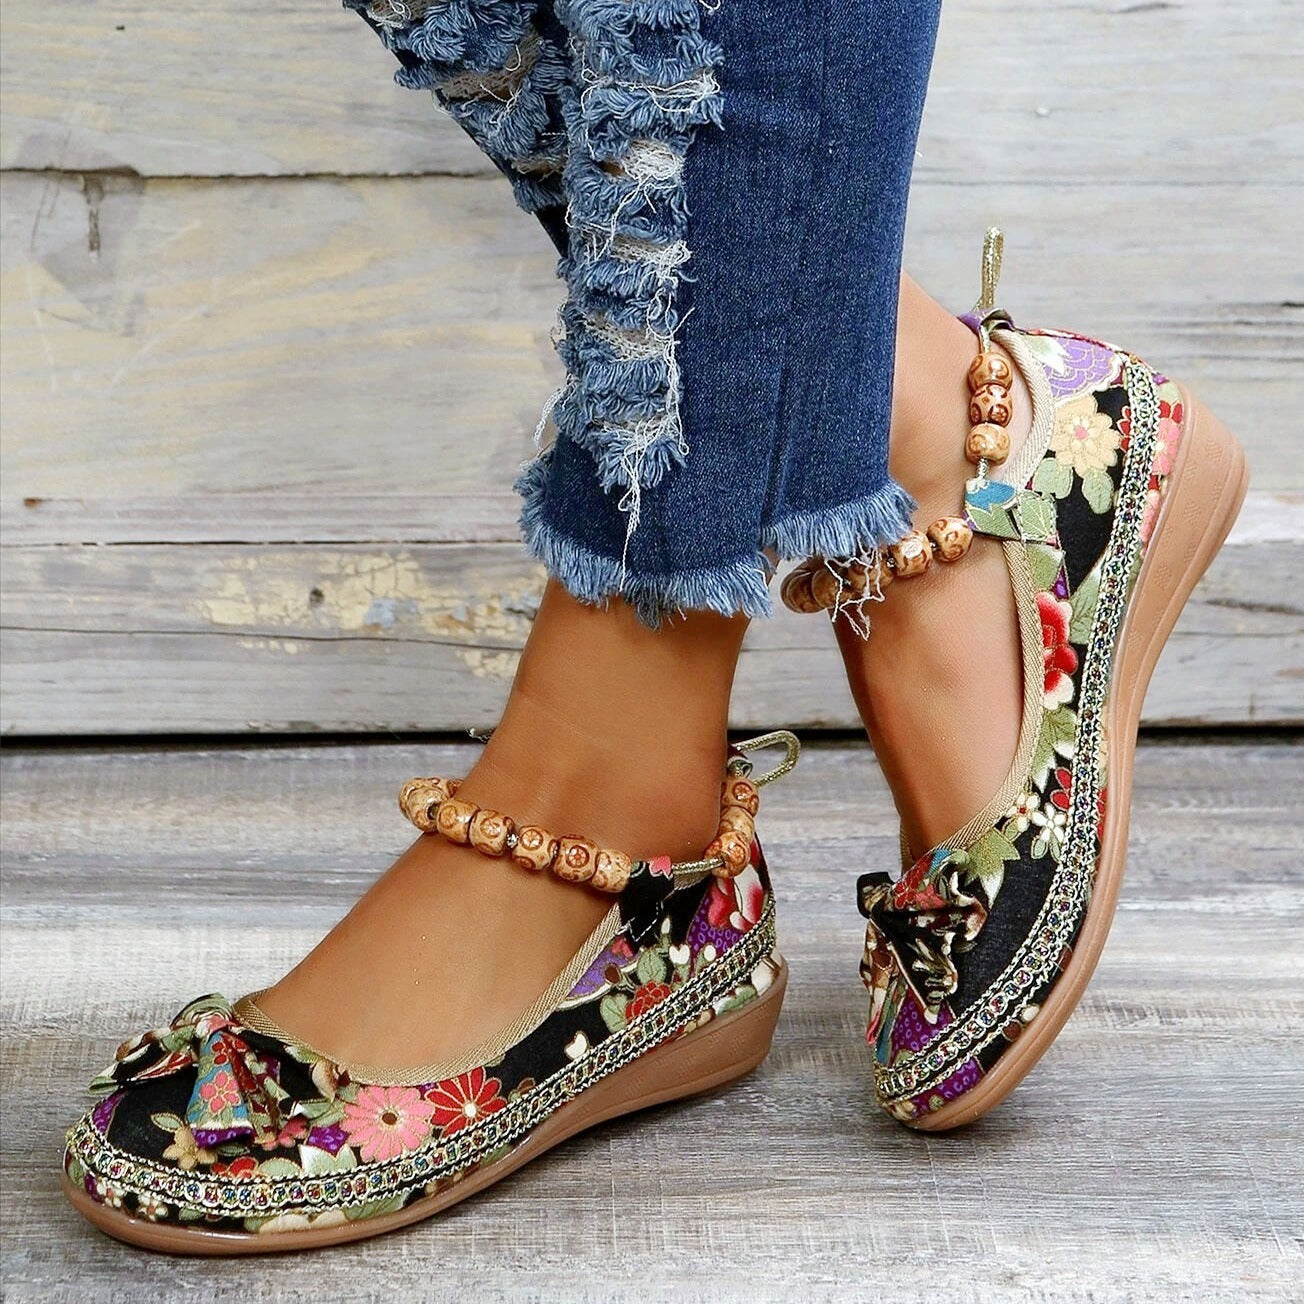 「binfenxie」Women's Stylish Floral Print Slip-Ons - Ethnic Ankle Strap Flat Shoes for Casual Walks